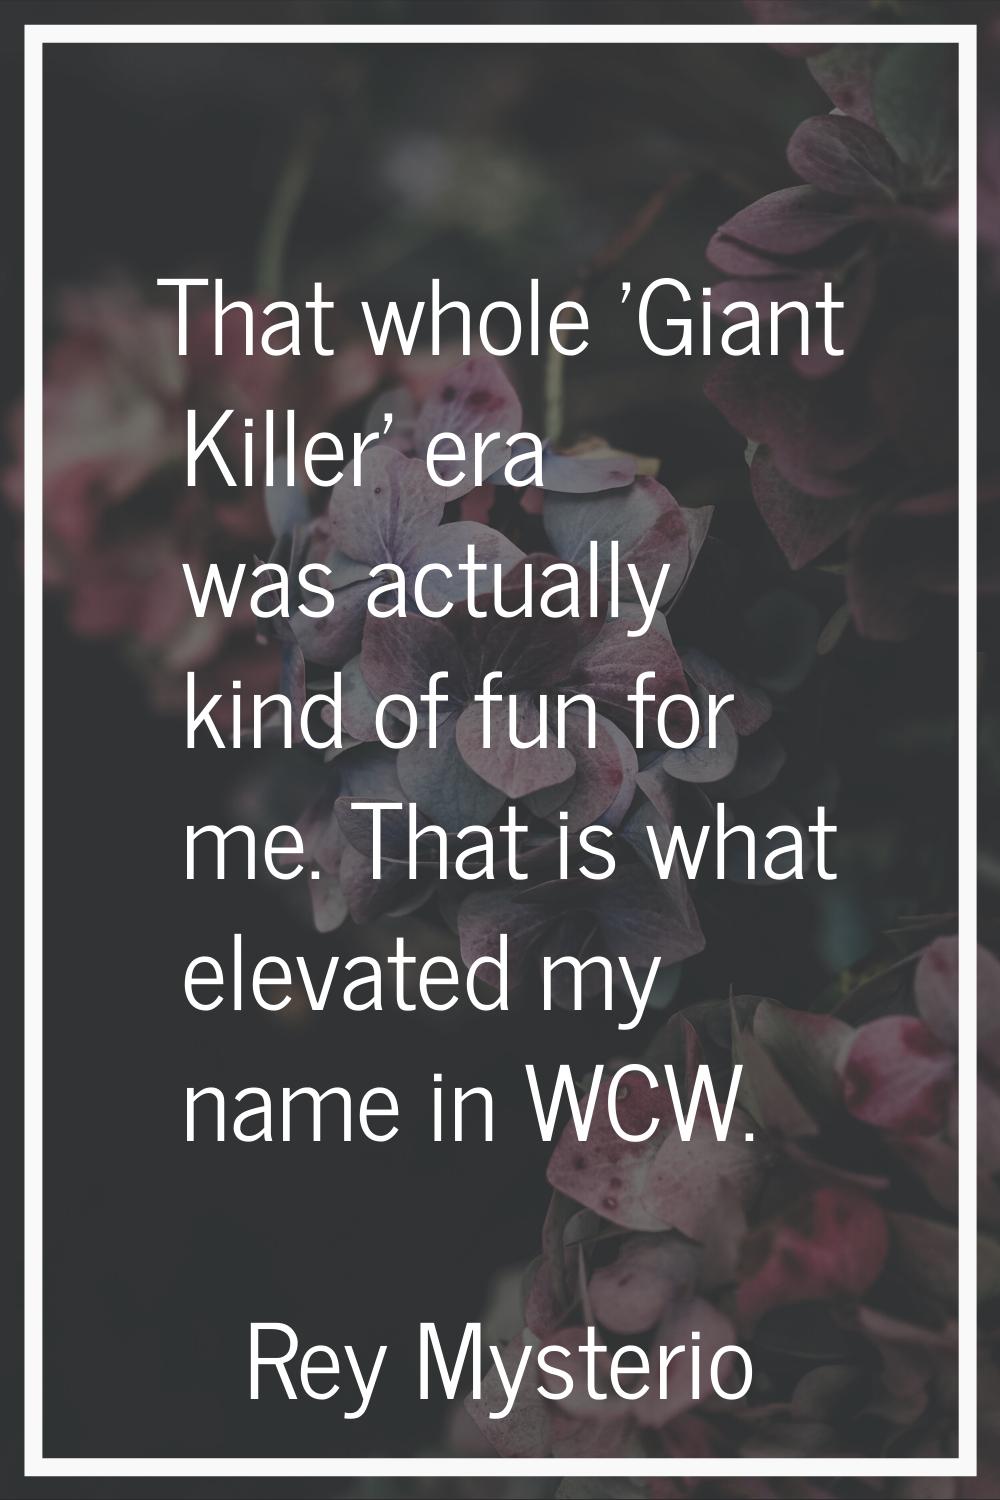 That whole 'Giant Killer' era was actually kind of fun for me. That is what elevated my name in WCW